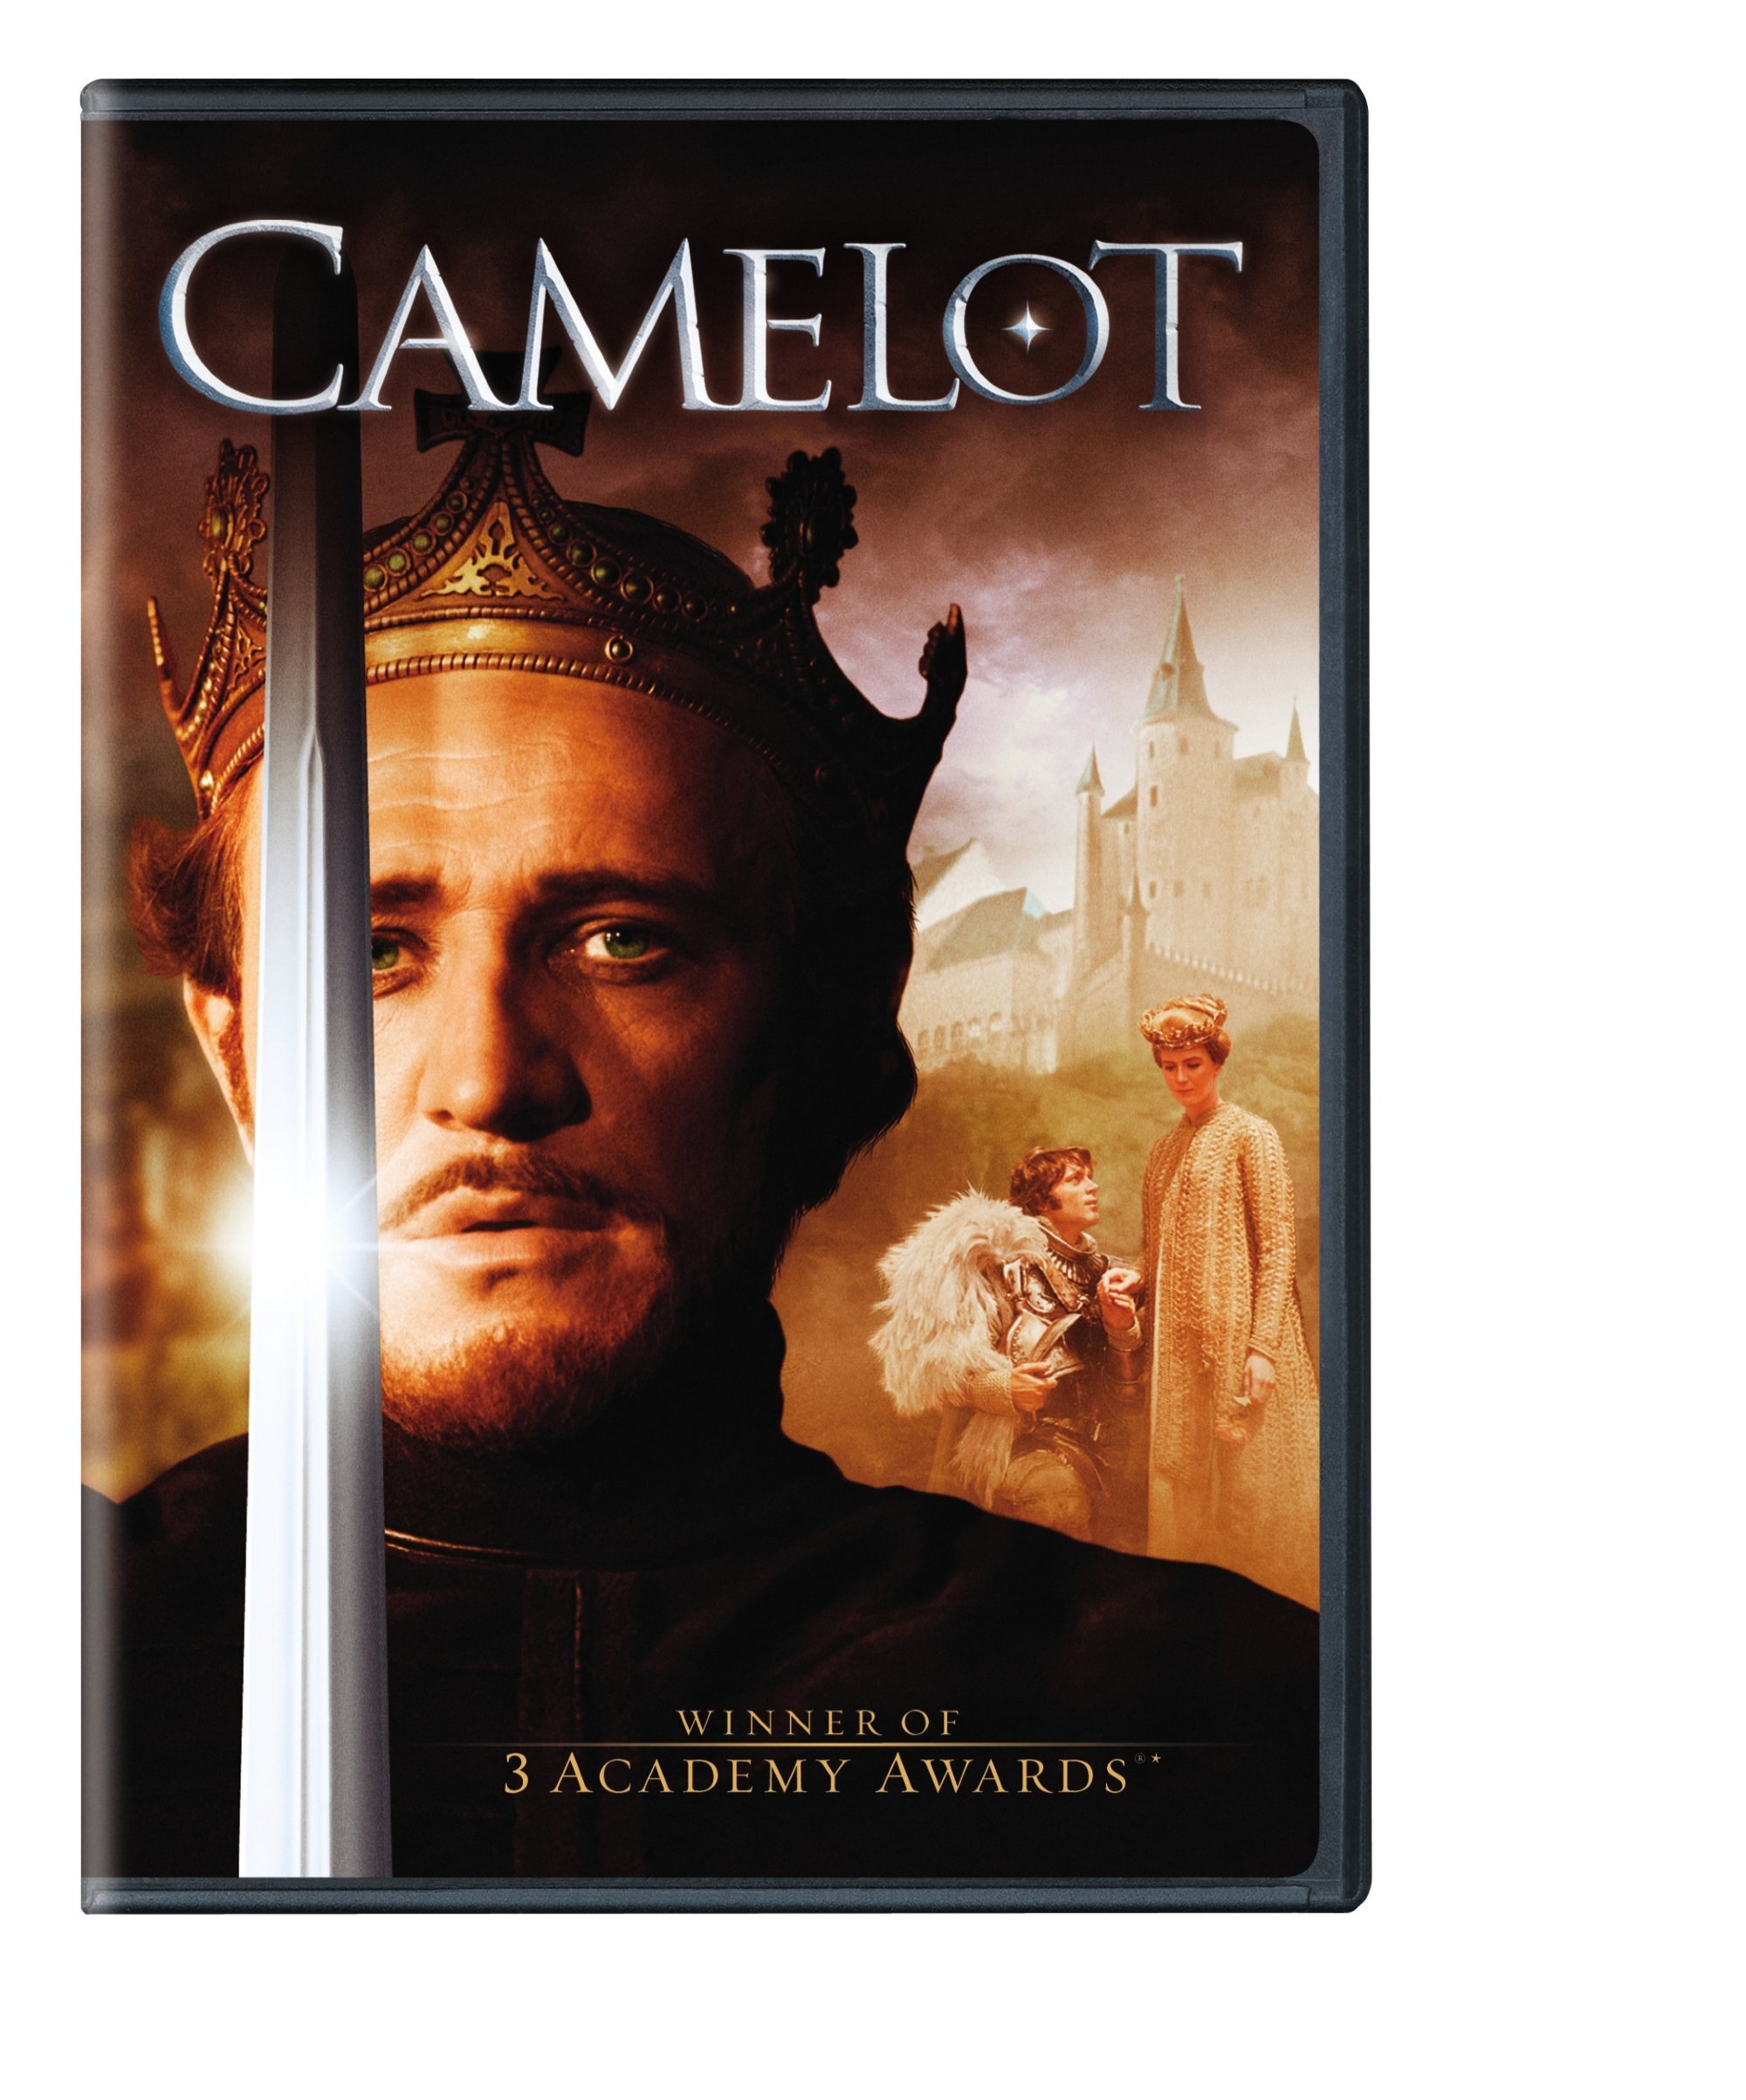 Camelot (45th Anniversary Edition) - DVD [ 1967 ]  - Musical Movies On DVD - Movies On GRUV